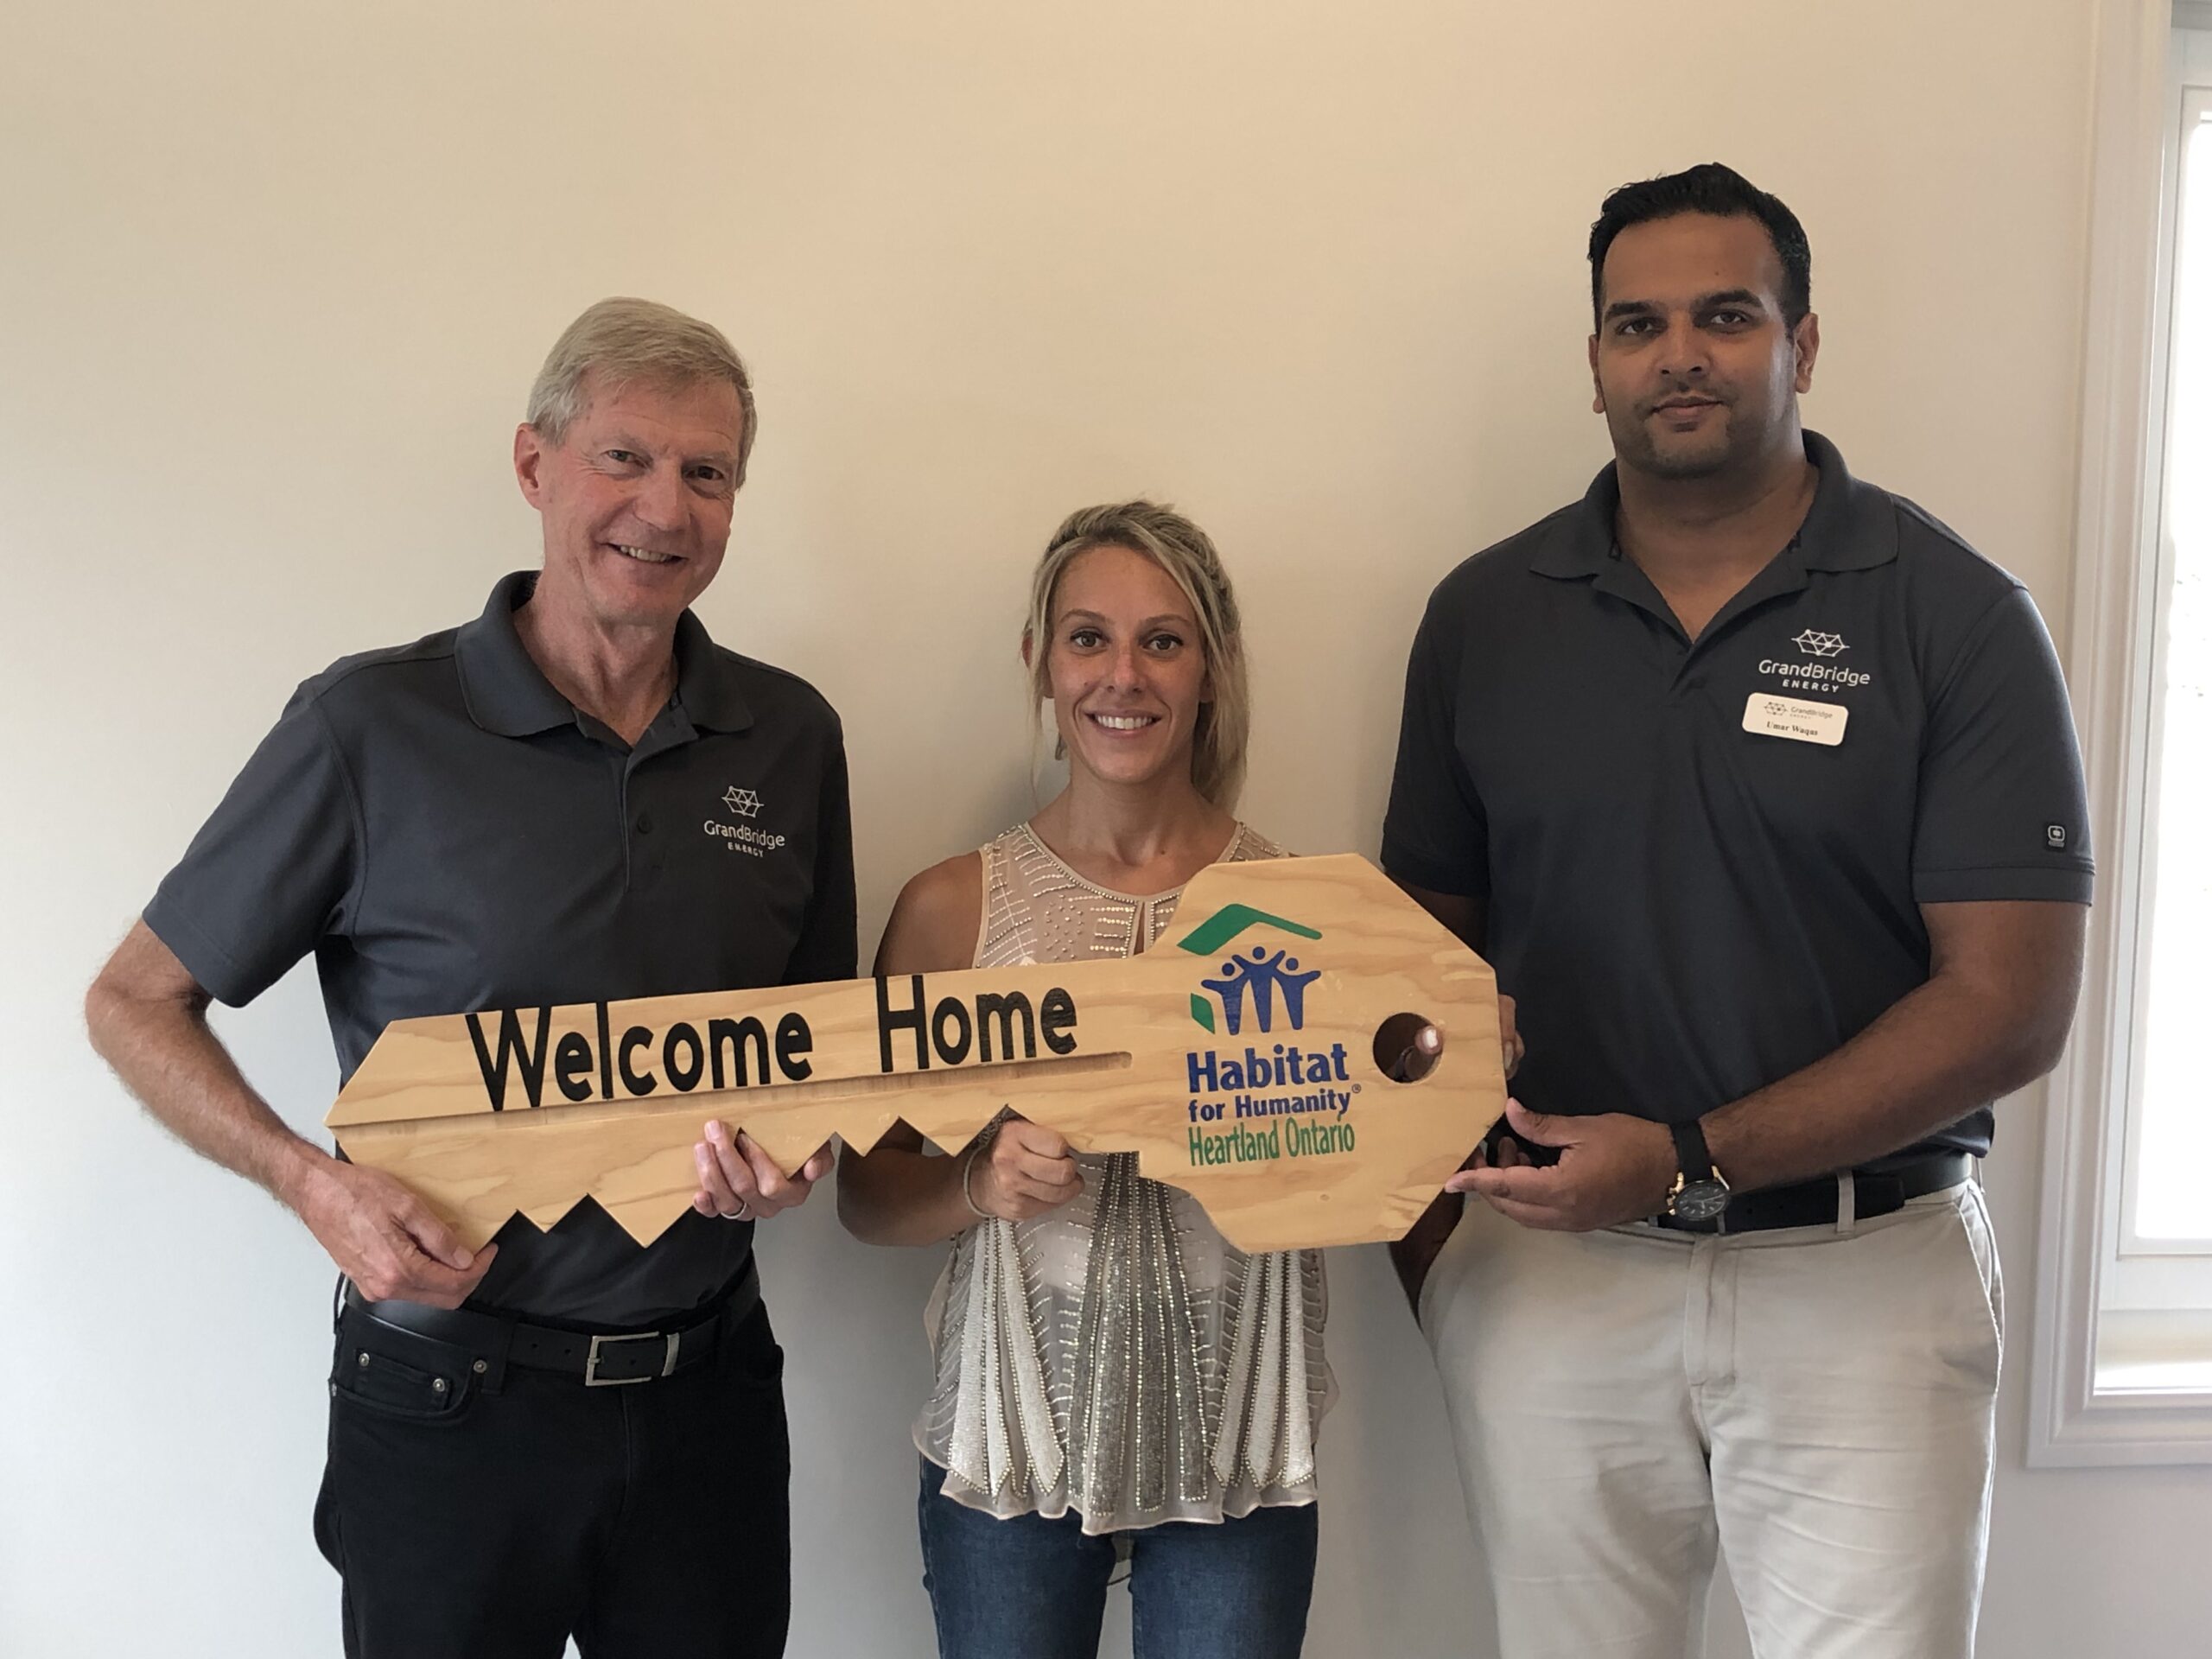 Three people hold a large wooden commemorative key with the Habitat for Humanity logo on it.